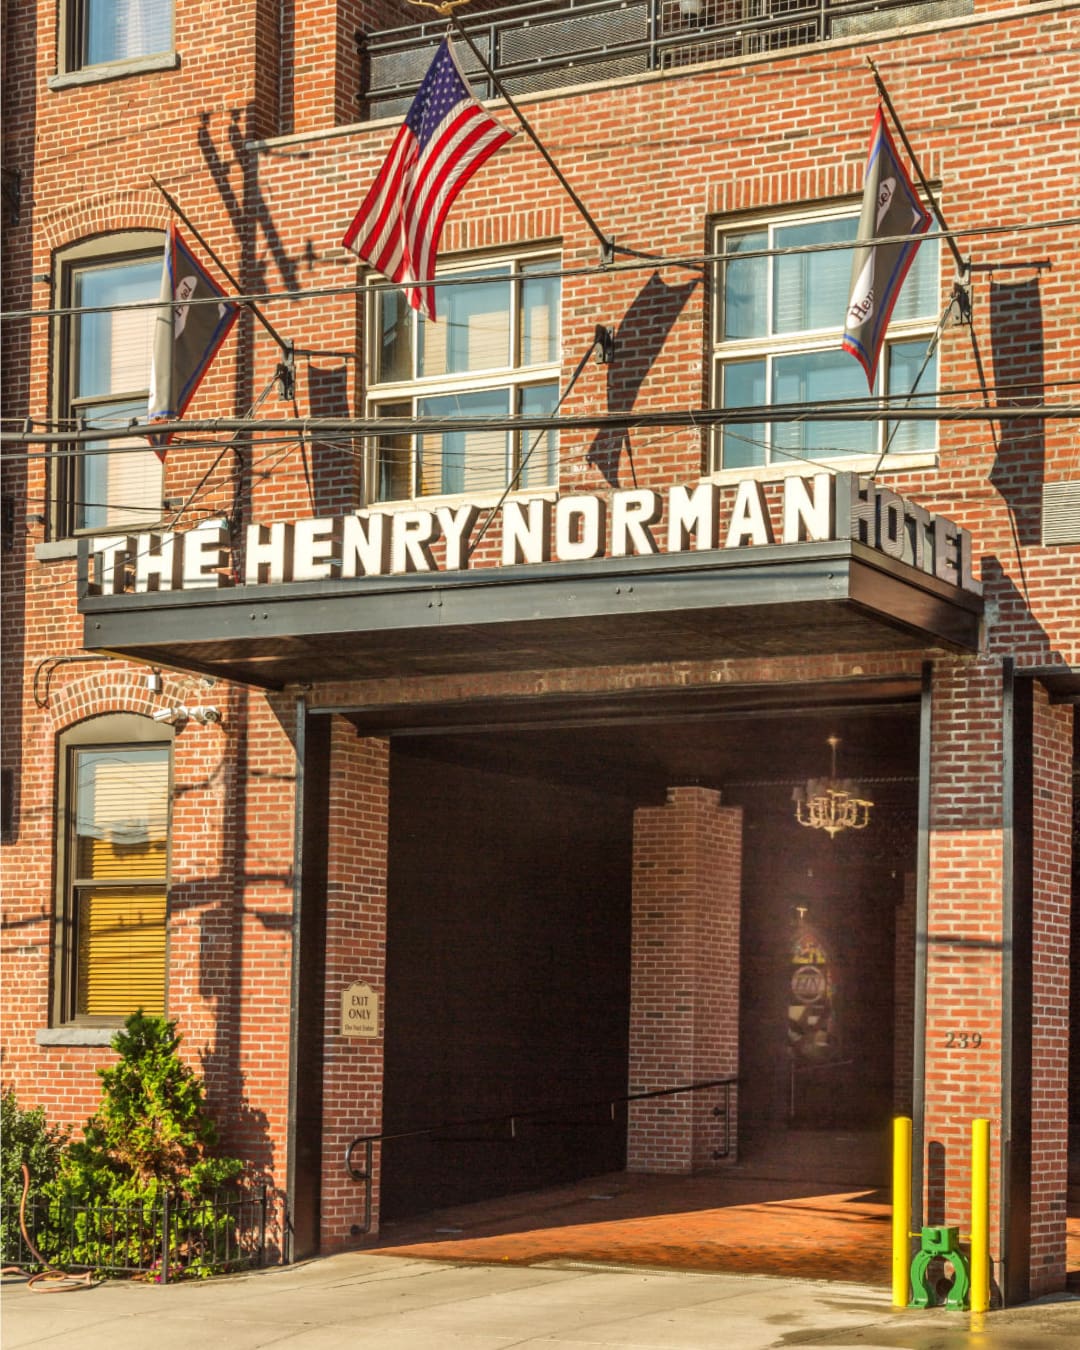 The Henry Norman hotel exterior